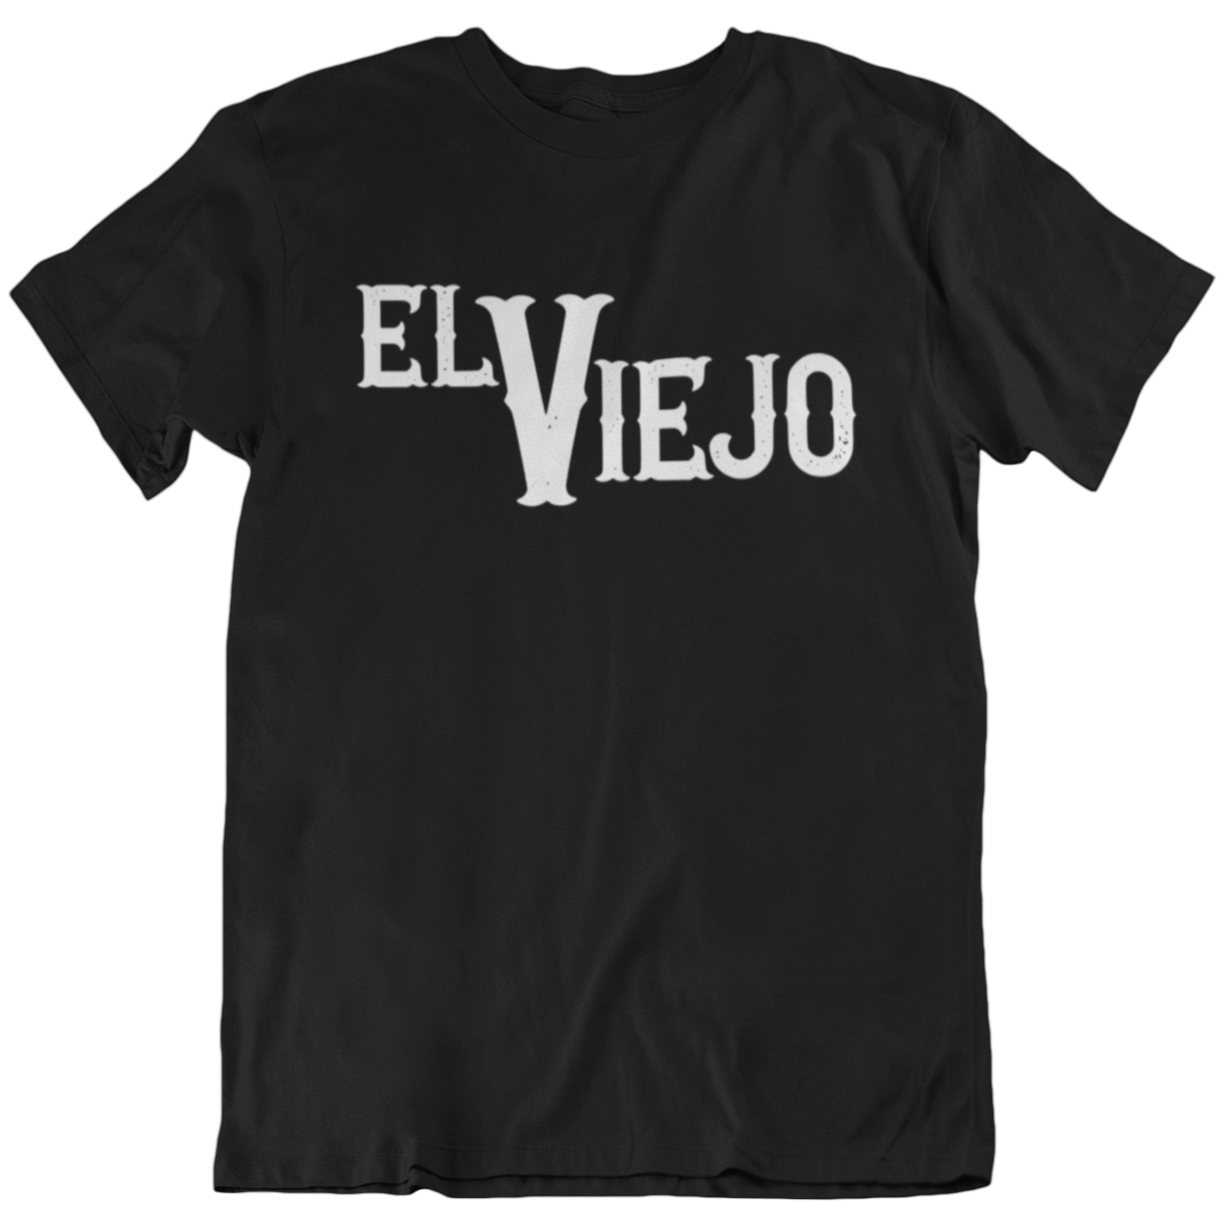 Funny black t-shirt for Latinos and Spanish-speakers. in bold white lettering, the front of the shirt states "El Viejo"